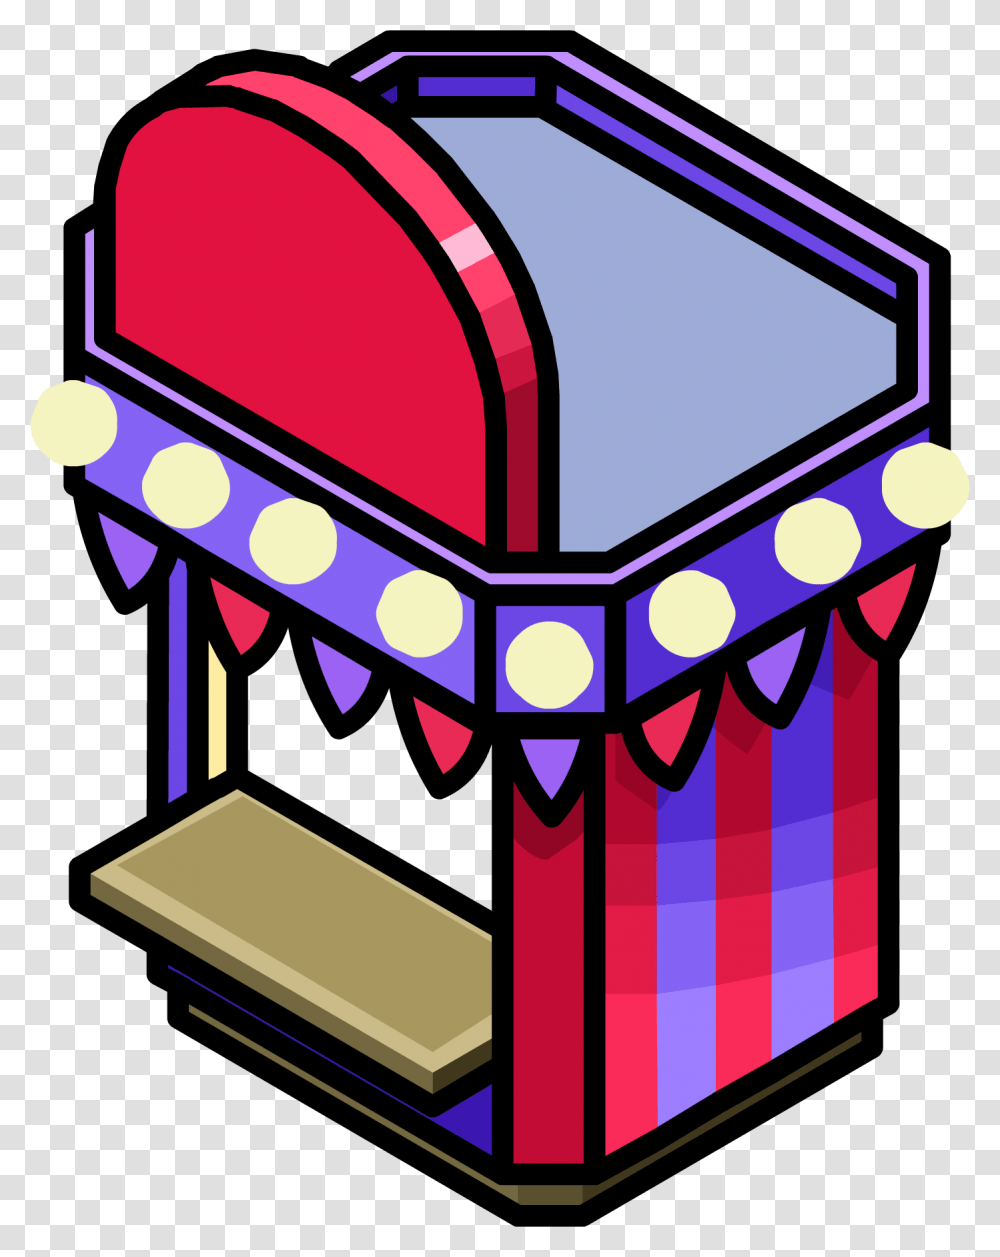 Club Penguin Wiki Booth Icon, Label, Dynamite, Bomb Transparent Png